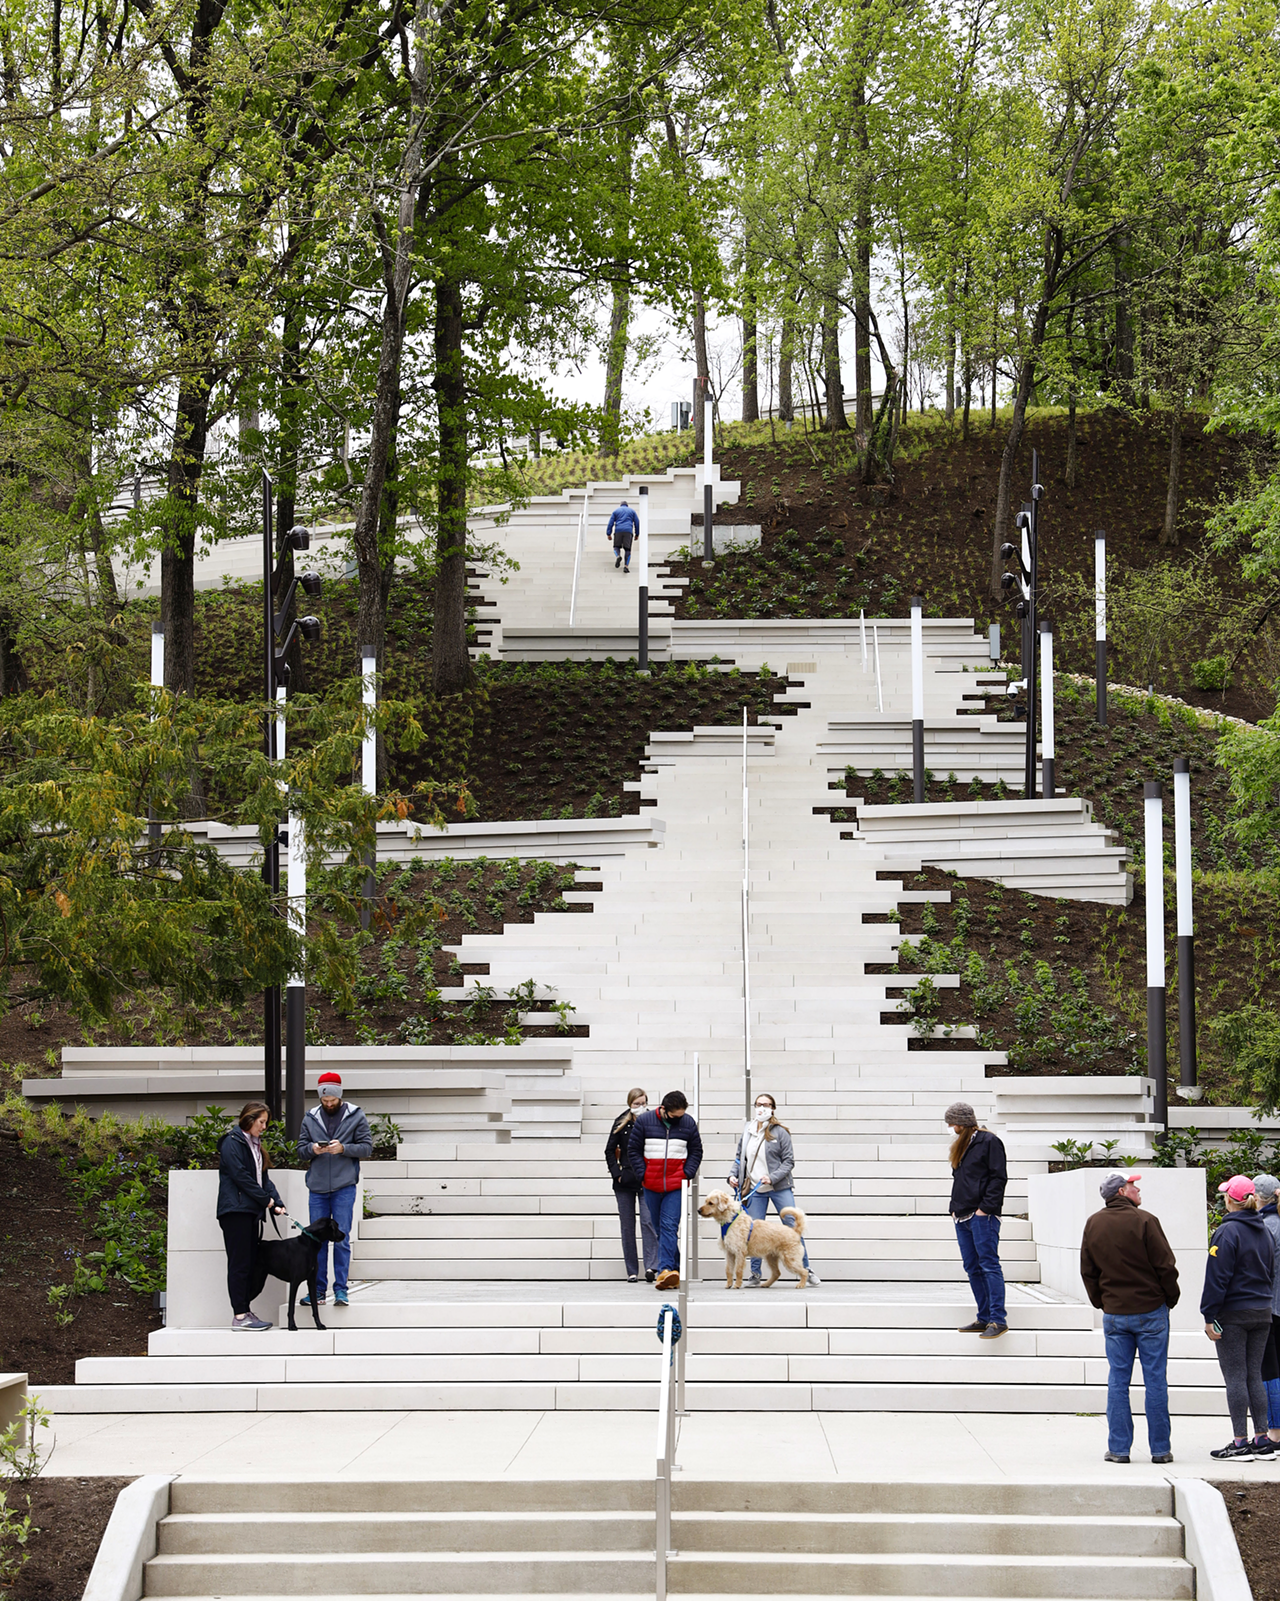 Art Climb Steps at CAM
Gilbert Avenue & Eden Park Drive, Walnut Hills
On the corner of the Cincinnati Art Museum’s property are multiple flights of steps leading from Gilbert Avenue up to the museum. But to quote the art museum, “It’s an art experience — not just steps.” On the Art Climb are three outdoor sculptures to view, including two from Pyramid Hill’s collection. And once you make it to the stop of the steps – about a 450-foot climb – you’re rewarded with a great view of the city.